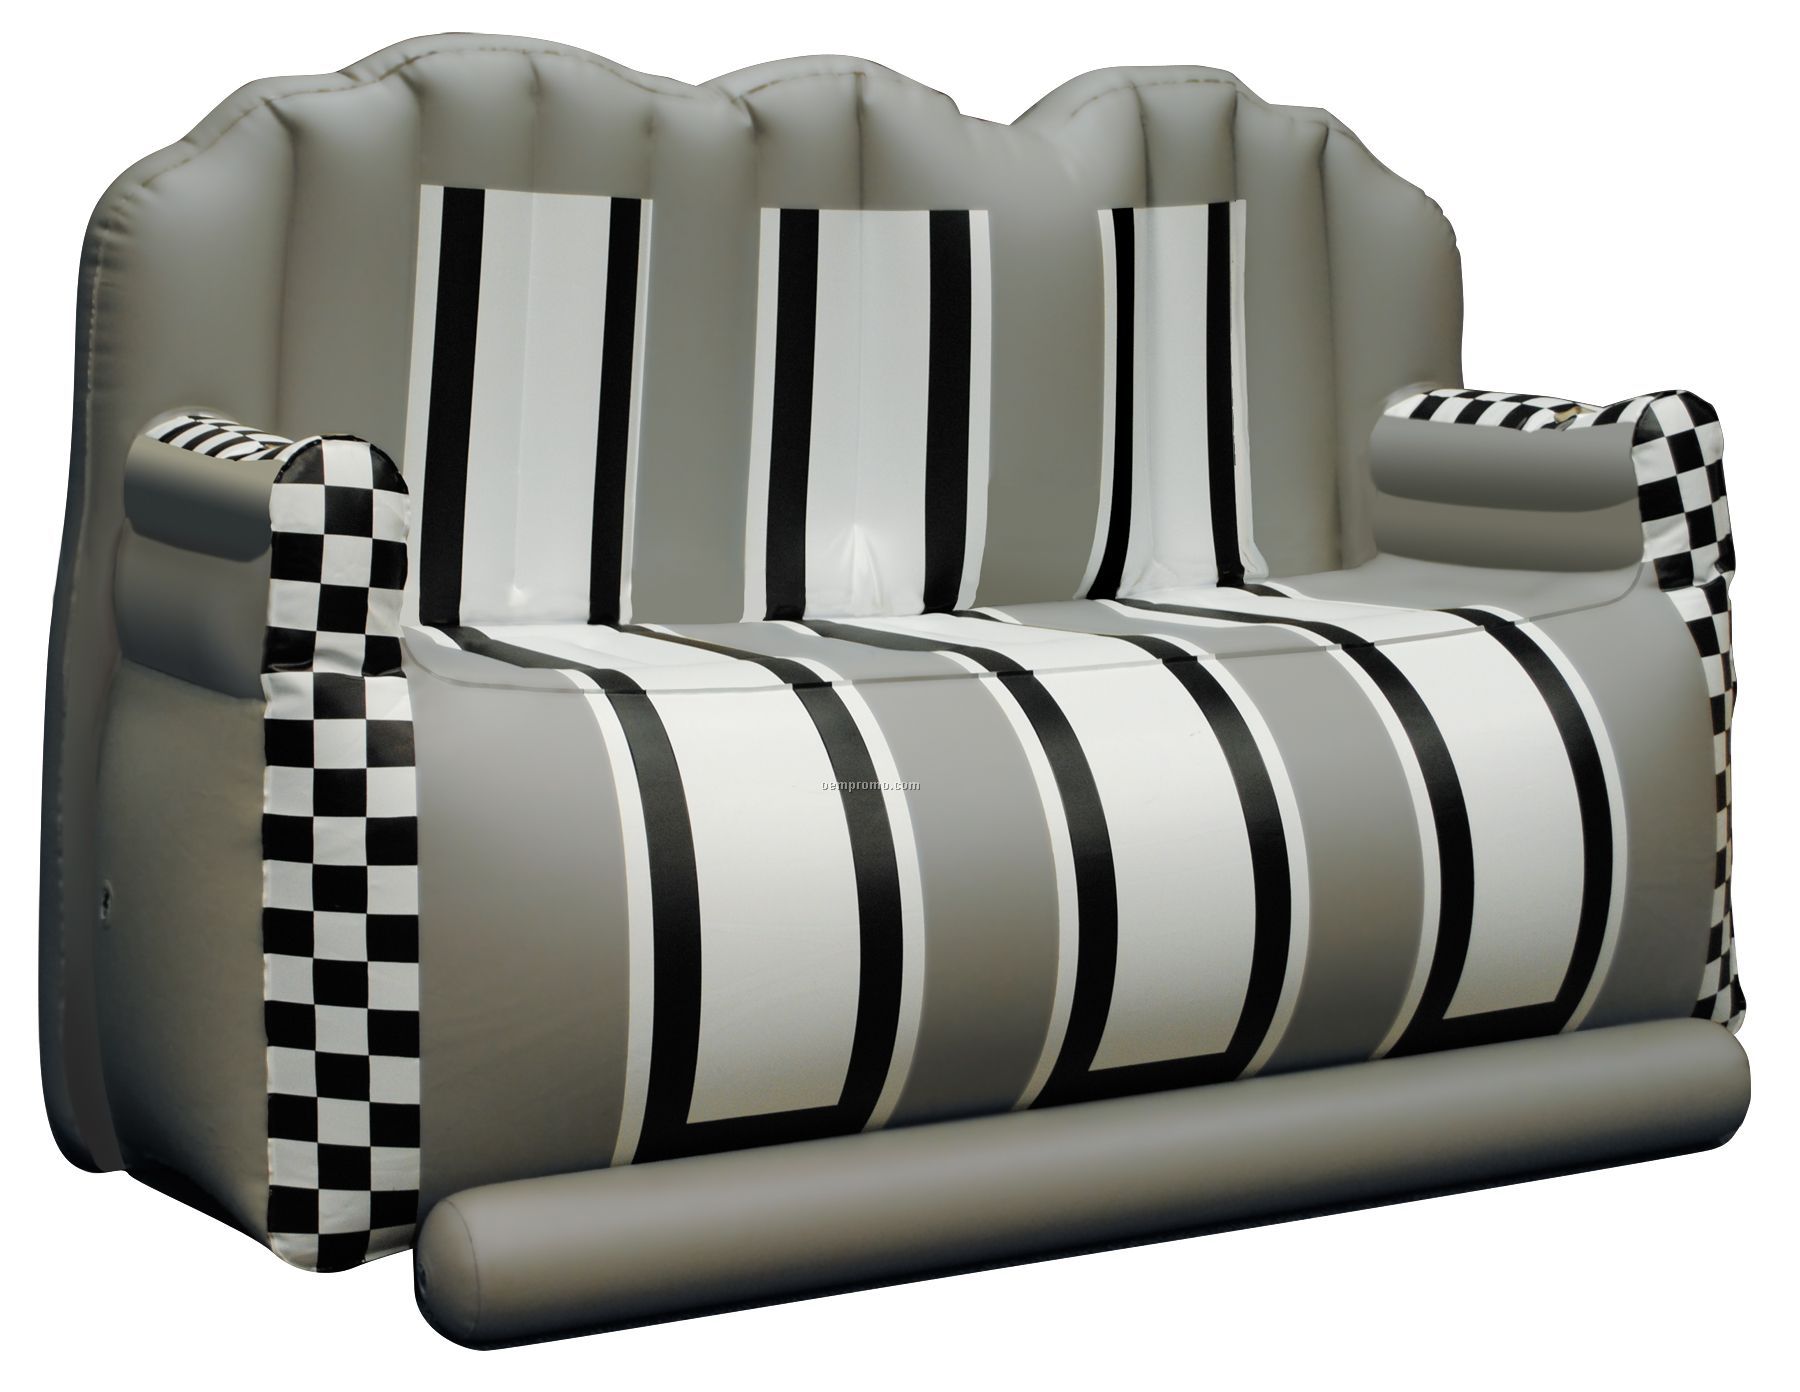 Inflate-a-seat "Couch": Gray/White/Black With Checkered Arms